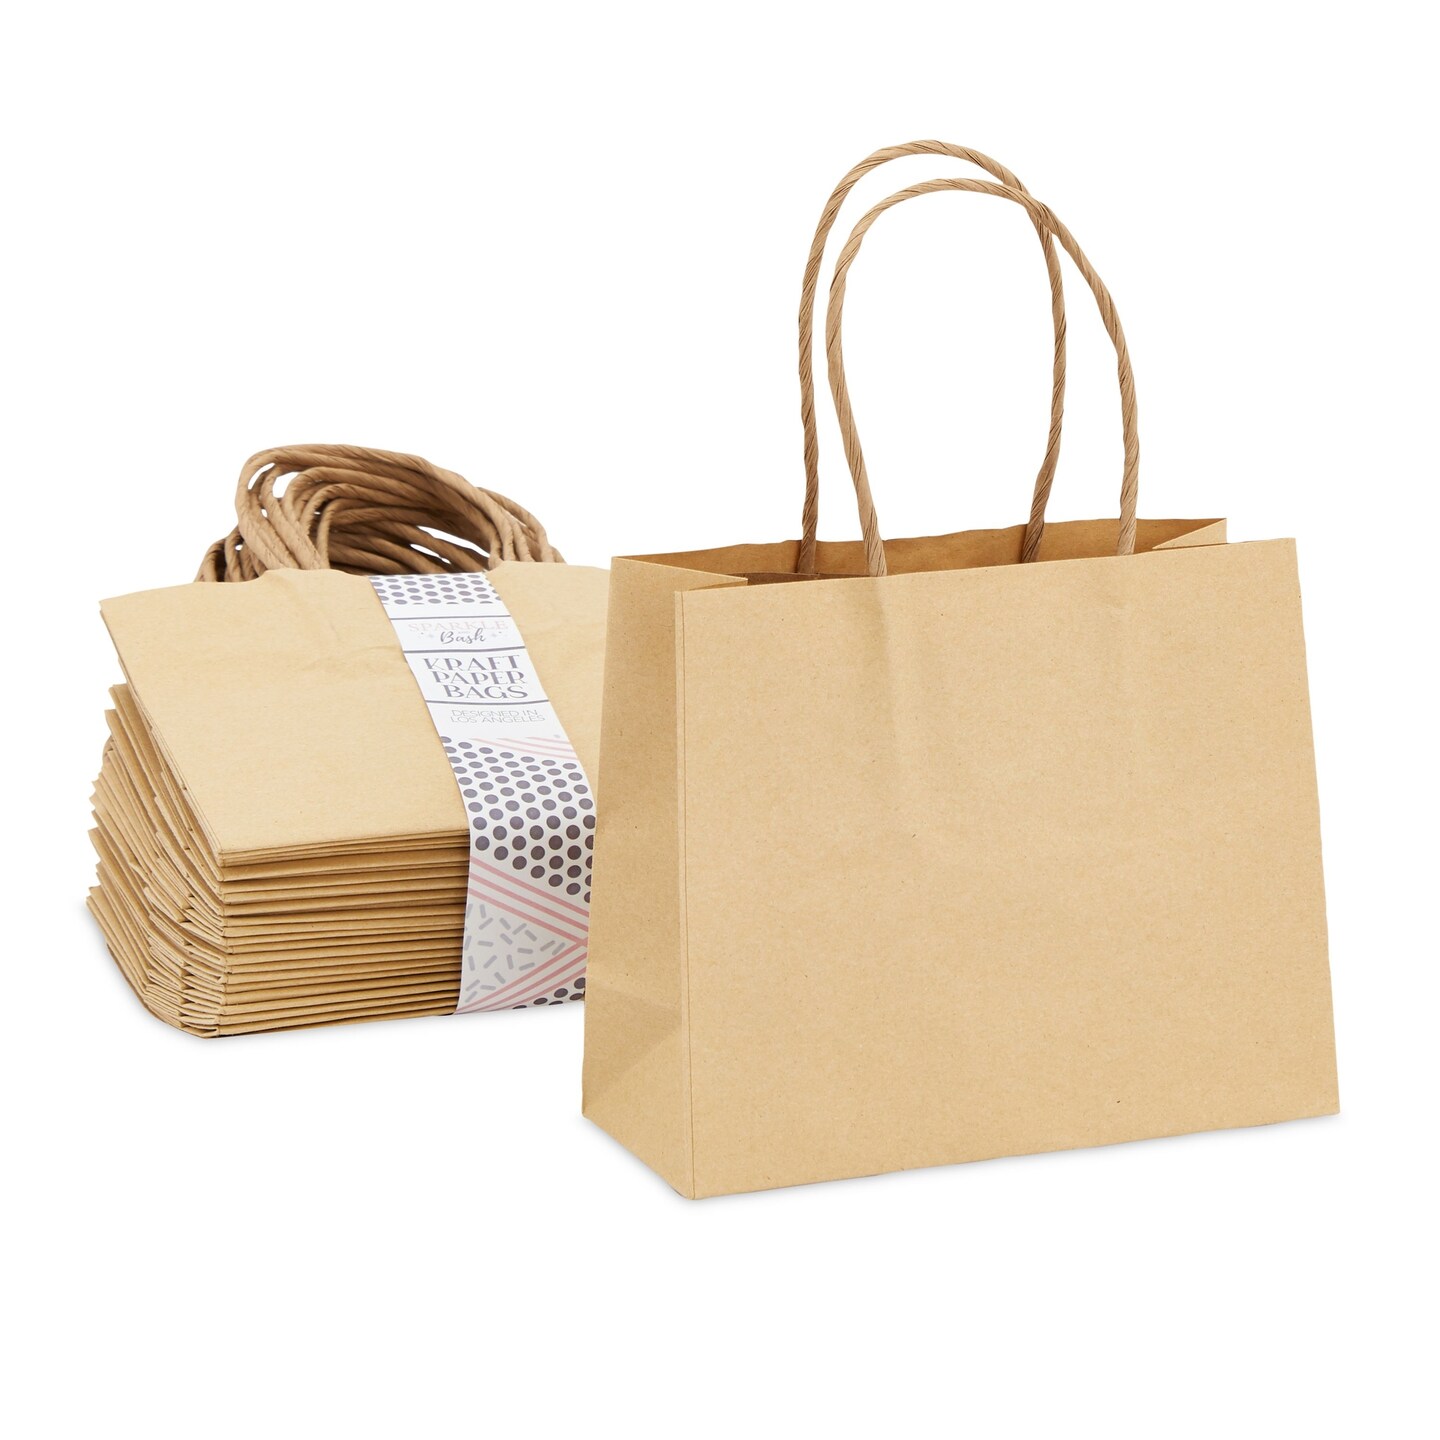 50 Pack Mini Paper Gift Bags with Handles 6x5x2.5 in, Bulk for Birthday Party Favors (Kraft Brown)